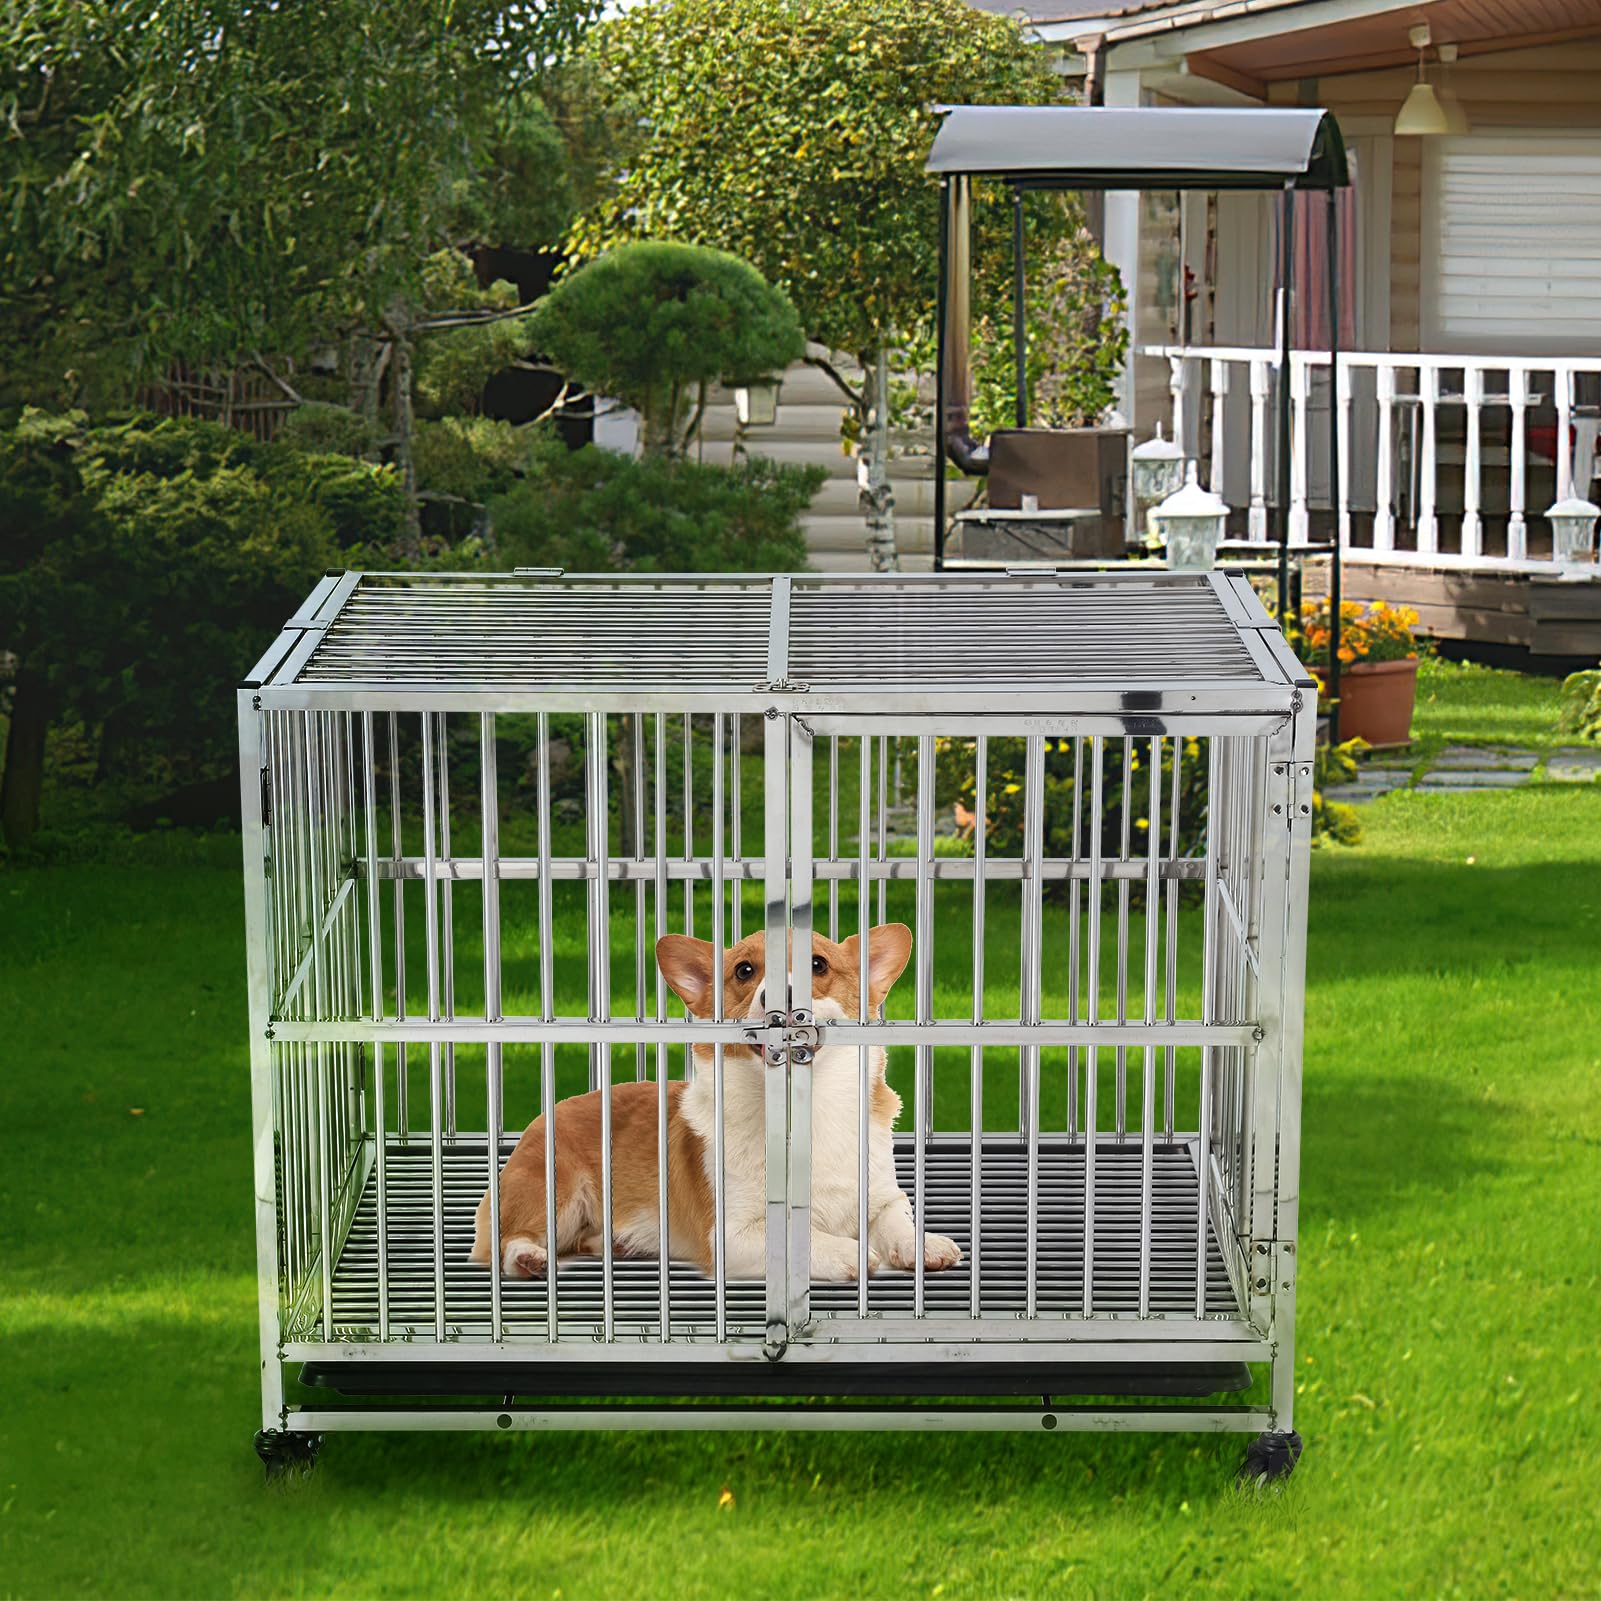 38 Inch Heavy Duty Stainless Steel Dog Crate with Wheels & Tray